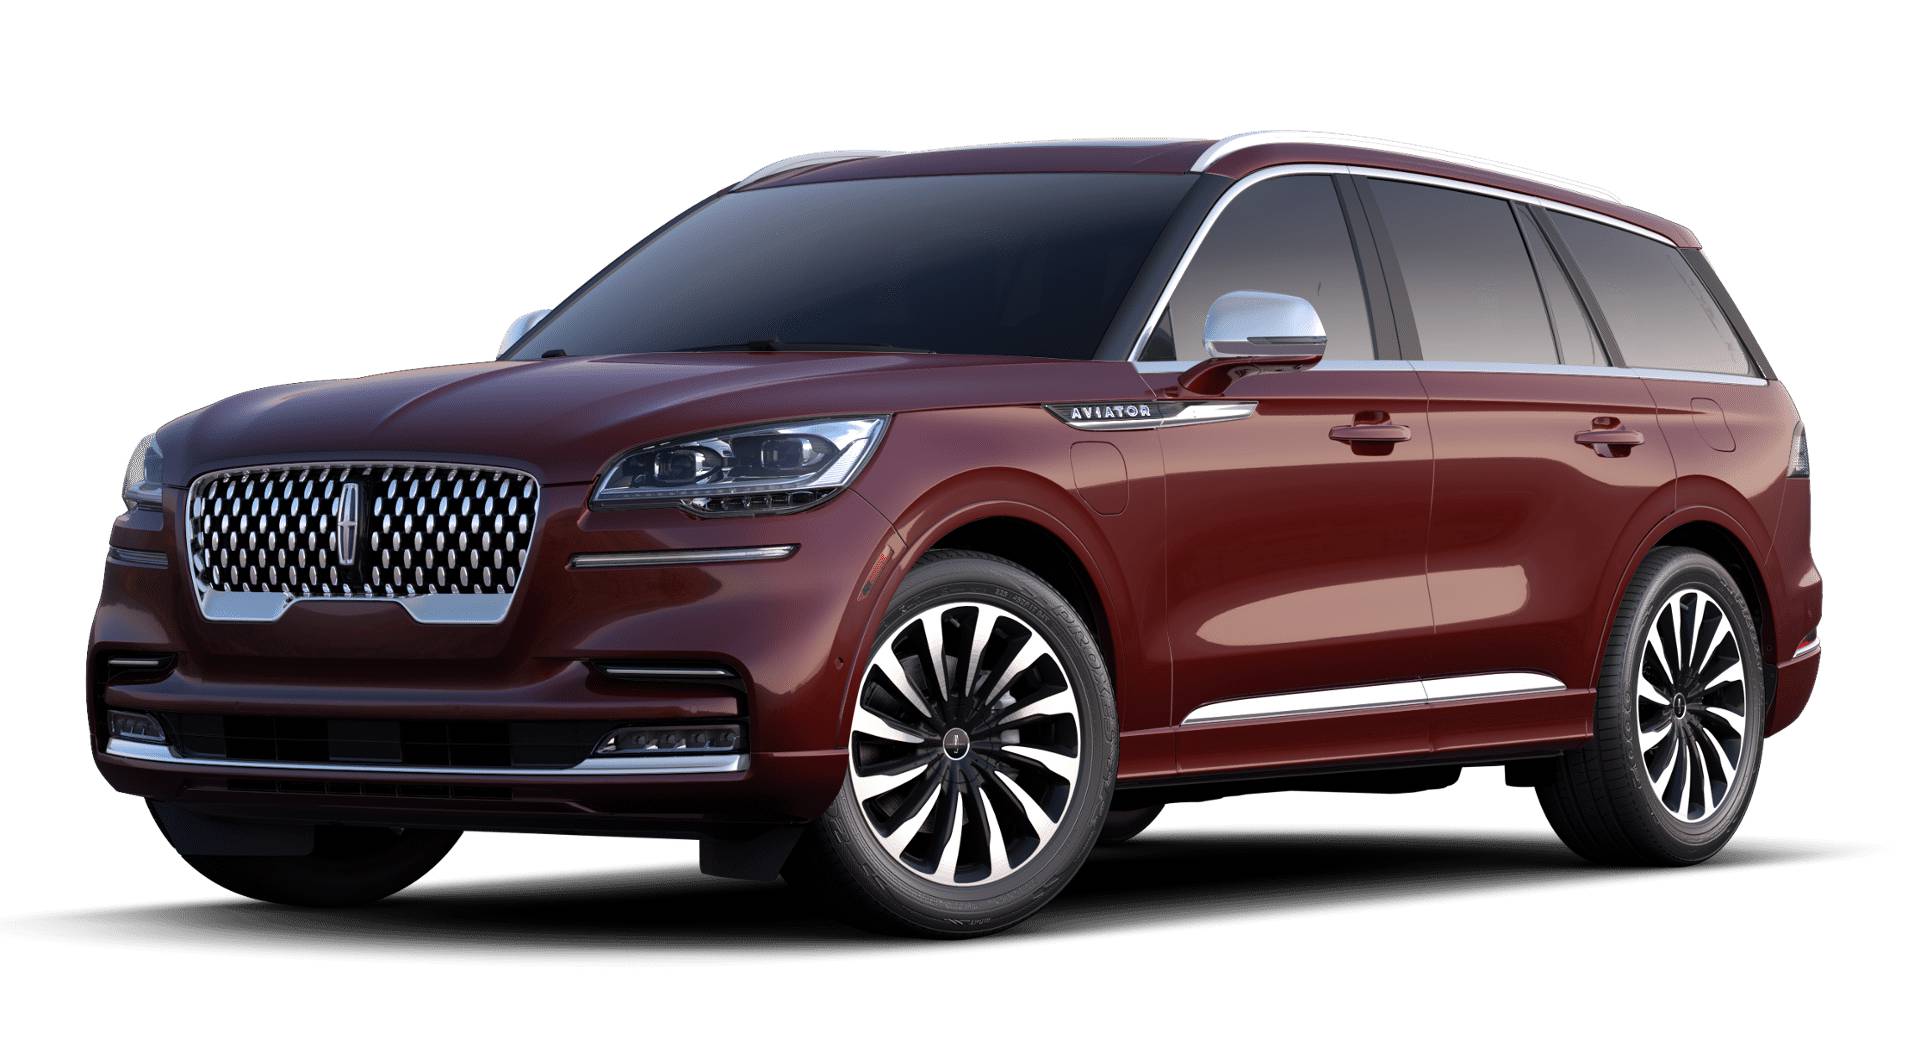 2020 Lincoln Aviator Starts At 52,195, Loaded Black Label Tops 90,000